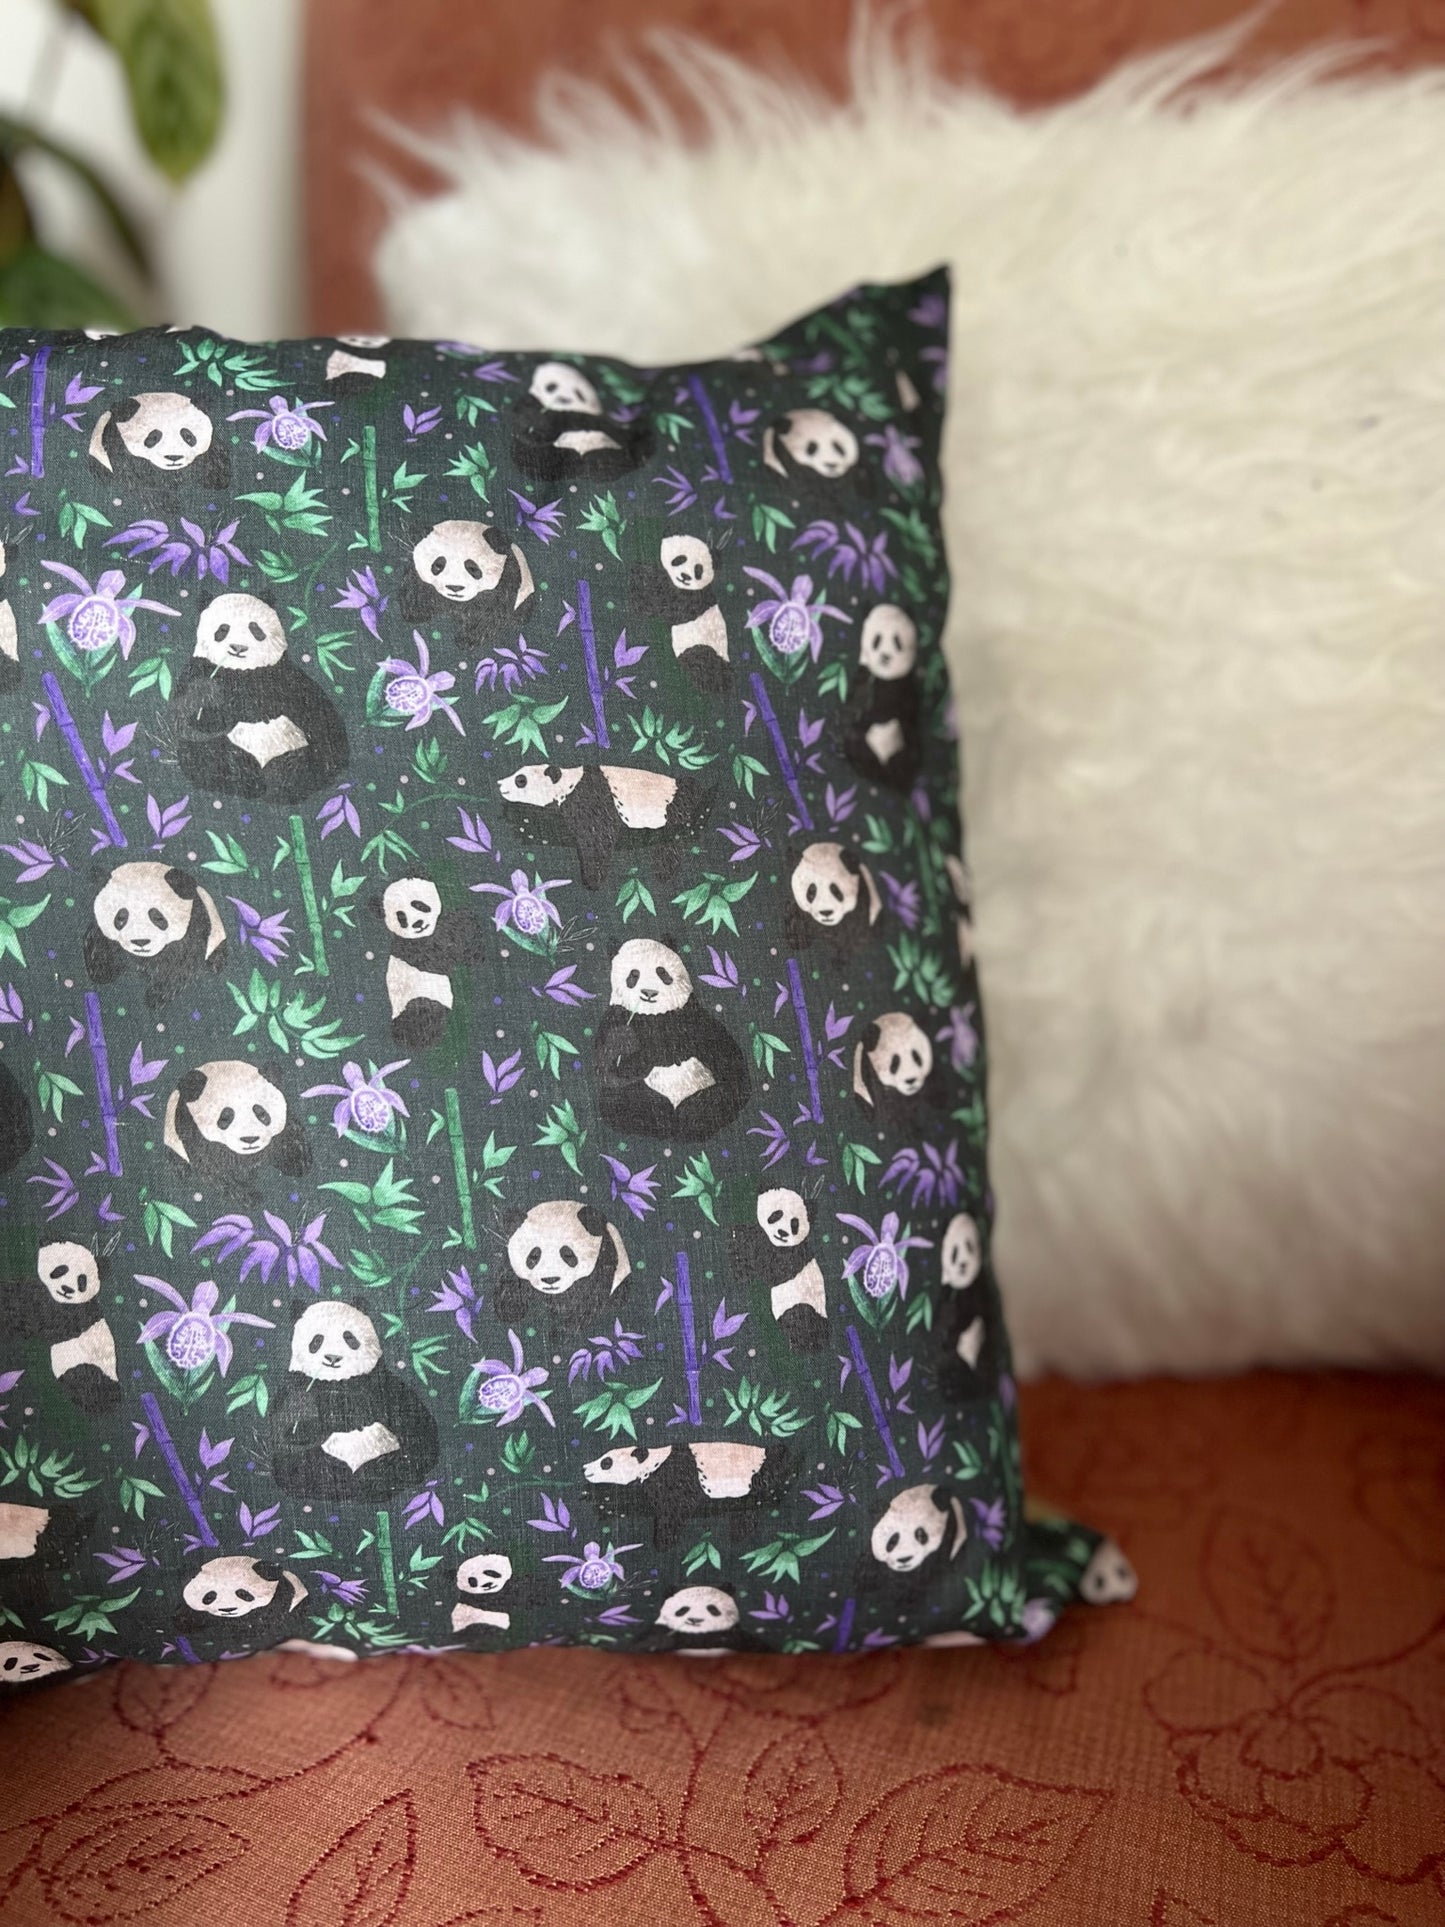 Best gifts for panda lovers, a cushion is a great way to brighten up a sofa. This decorative cushion for a sofa has a lovely panda pattern in a dark purple.